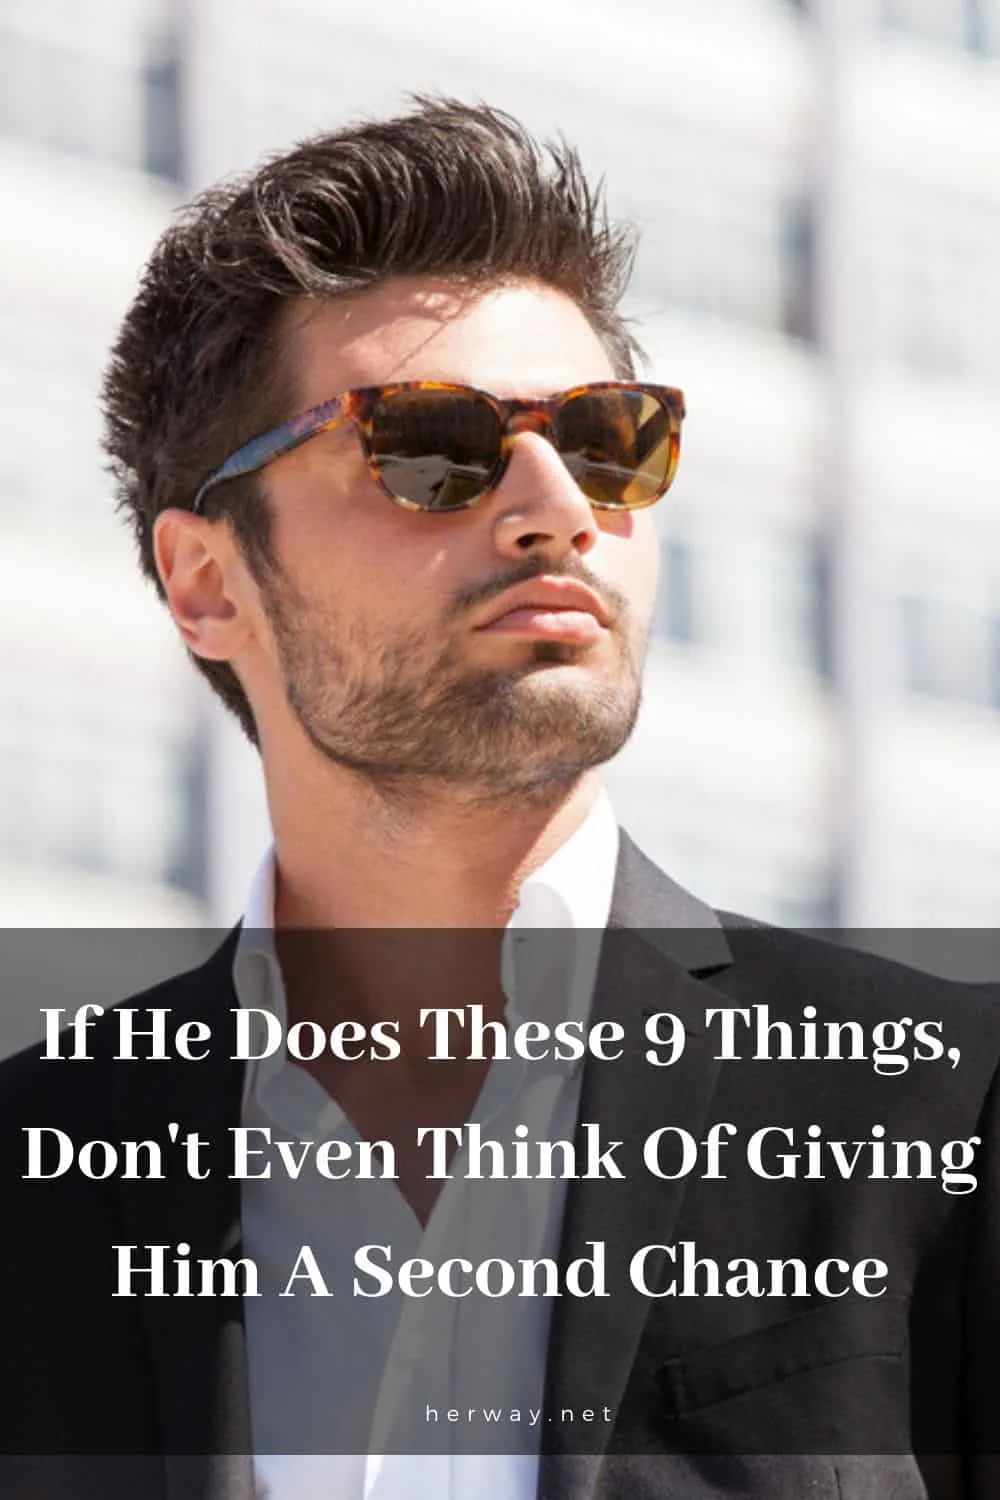 If He Does These 9 Things, Don't Even Think Of Giving Him A Second Chance